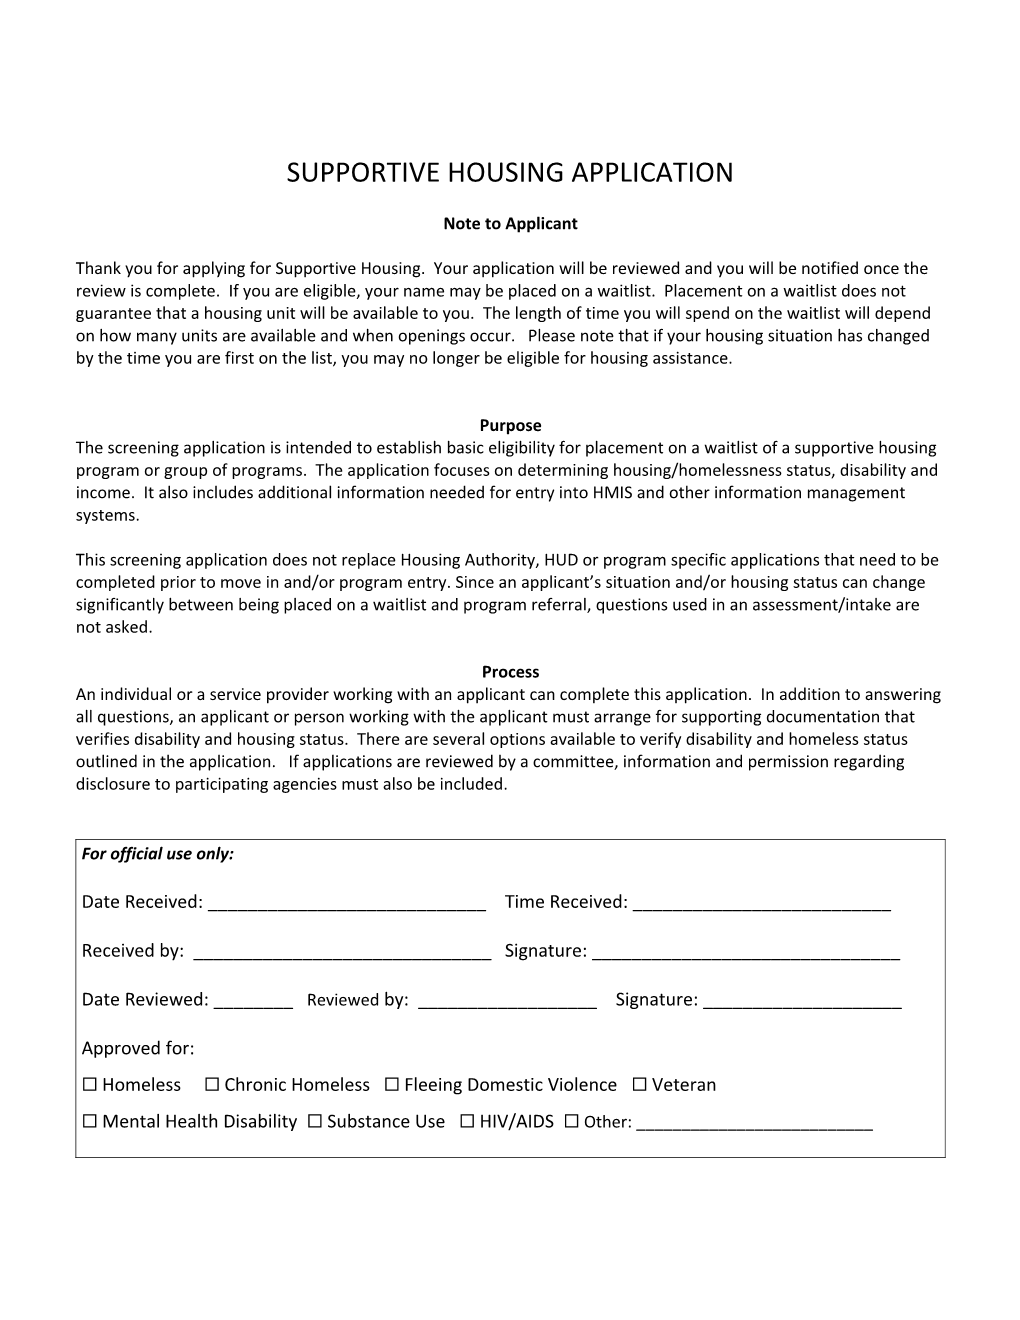 Supportive Housing Application